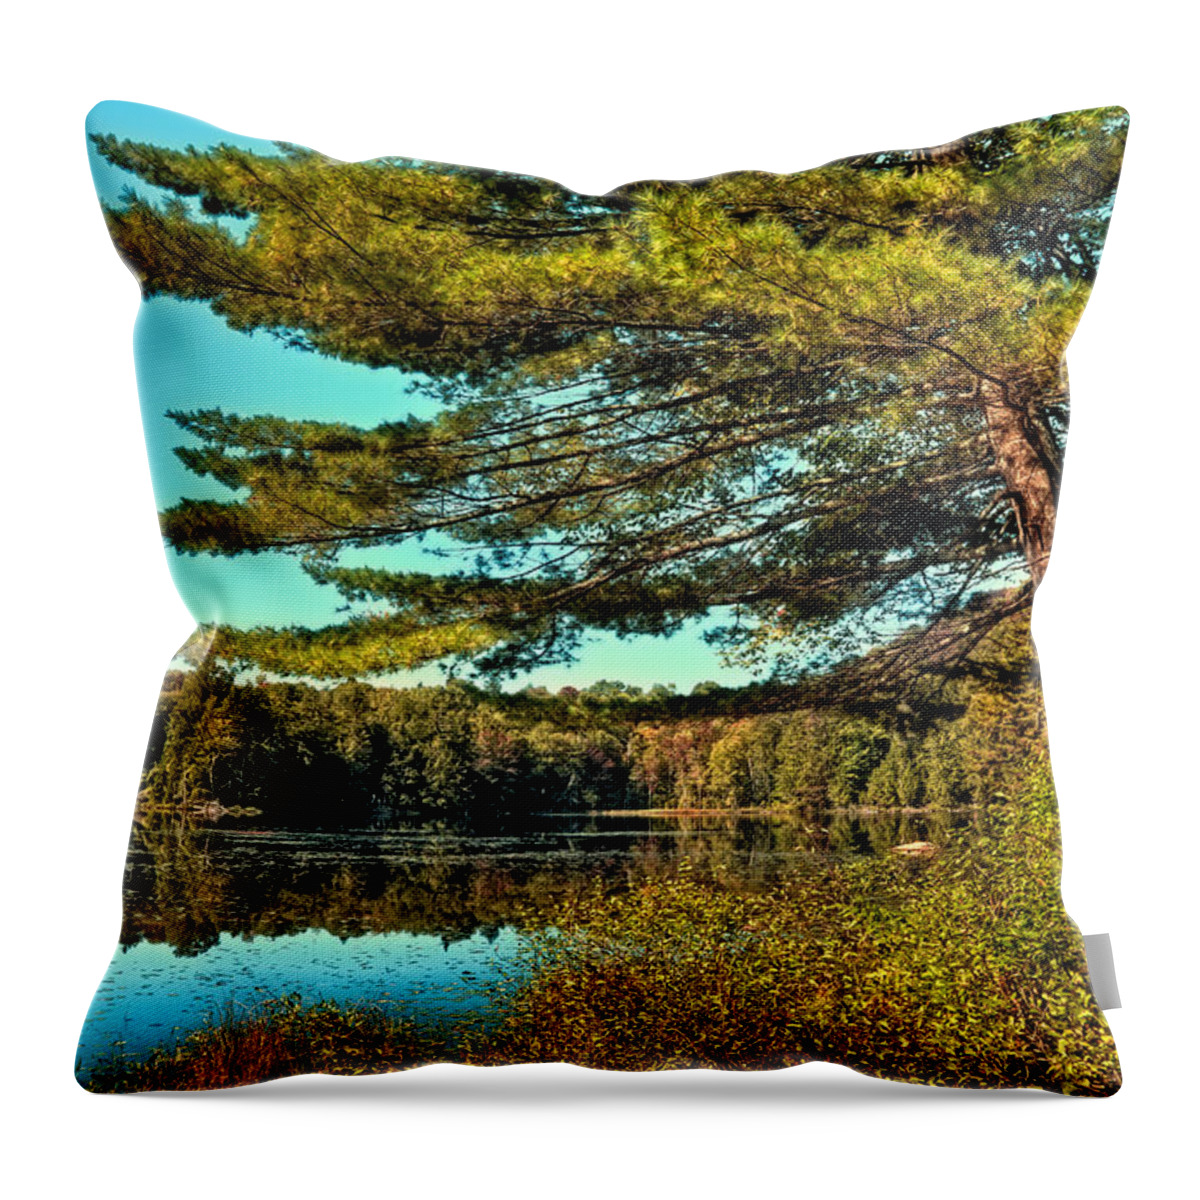 The Little Known Cary Lake Throw Pillow featuring the photograph The Little Known Cary Lake by David Patterson